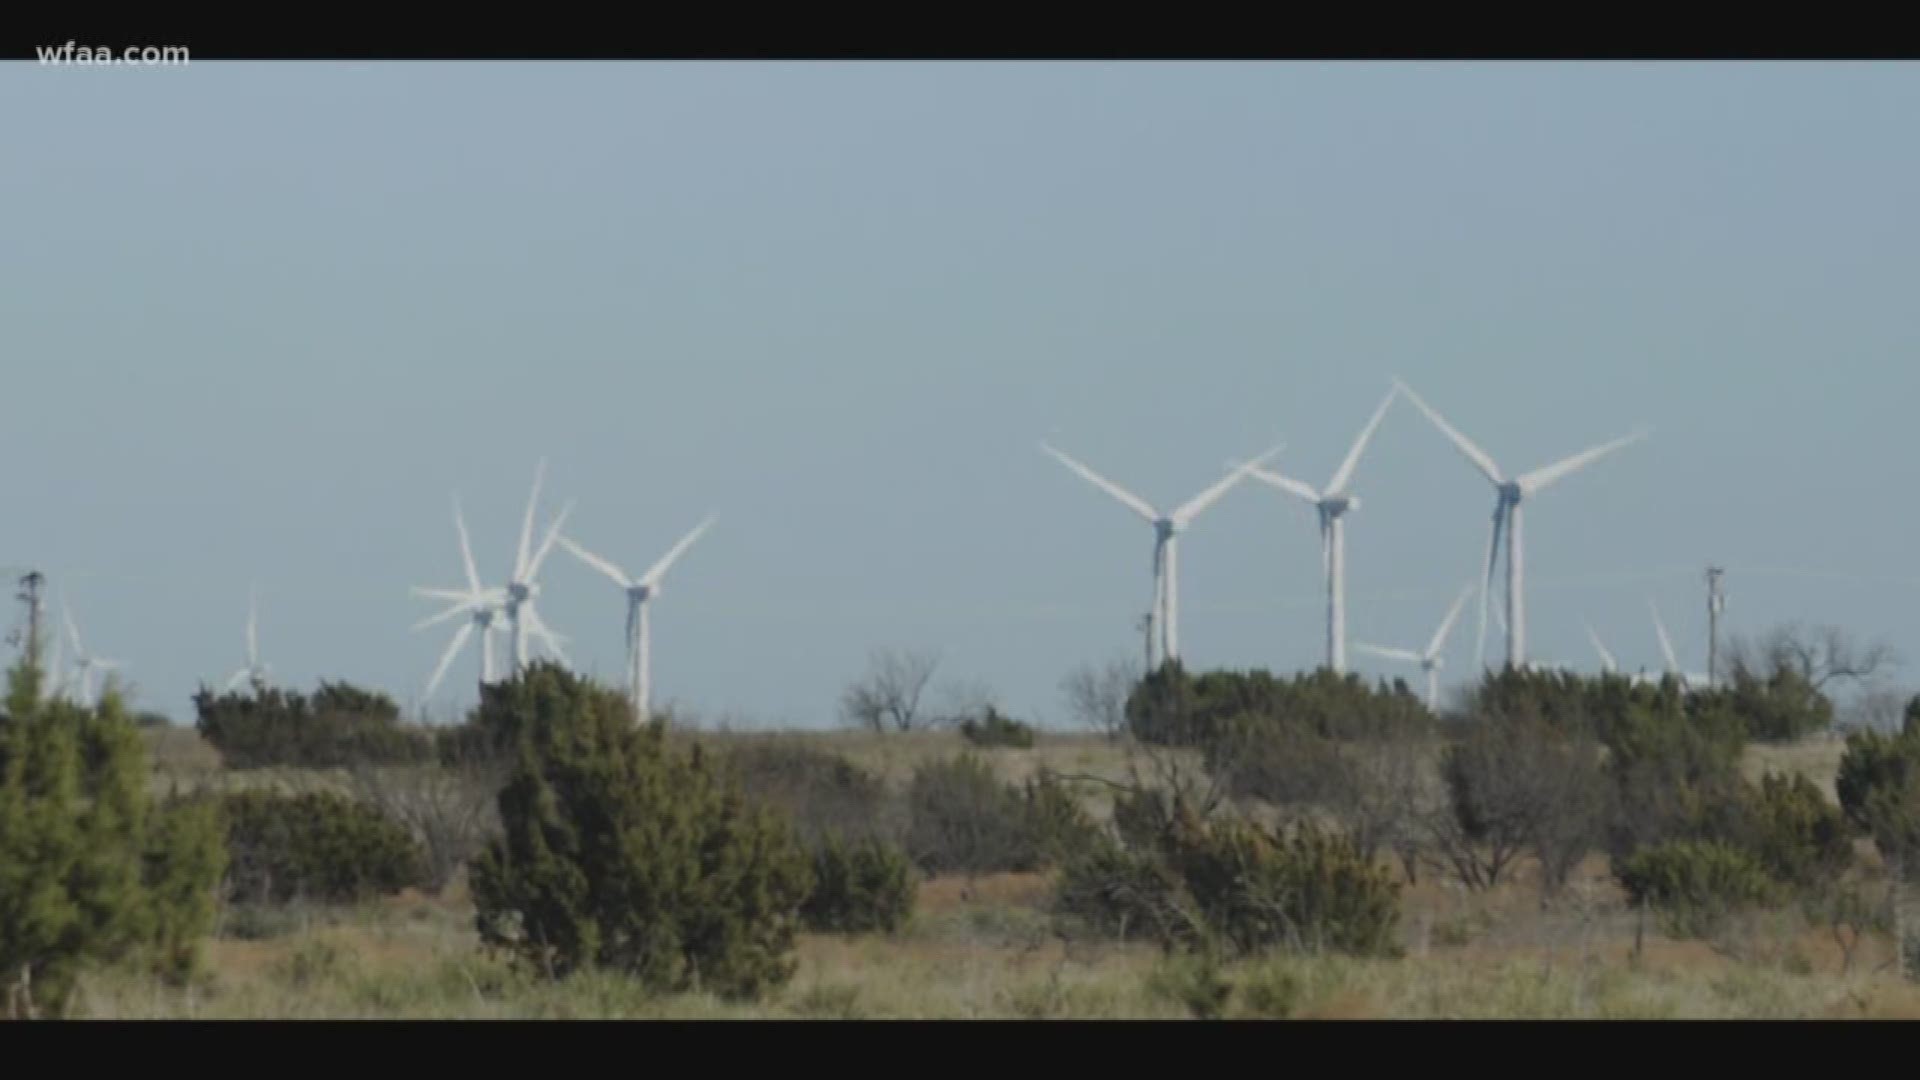 Texans have spent $7 billion on massive transmission lines that bring wind energy from West Texas to Dallas-Fort Worth, Houston, San Antonio and Austin.